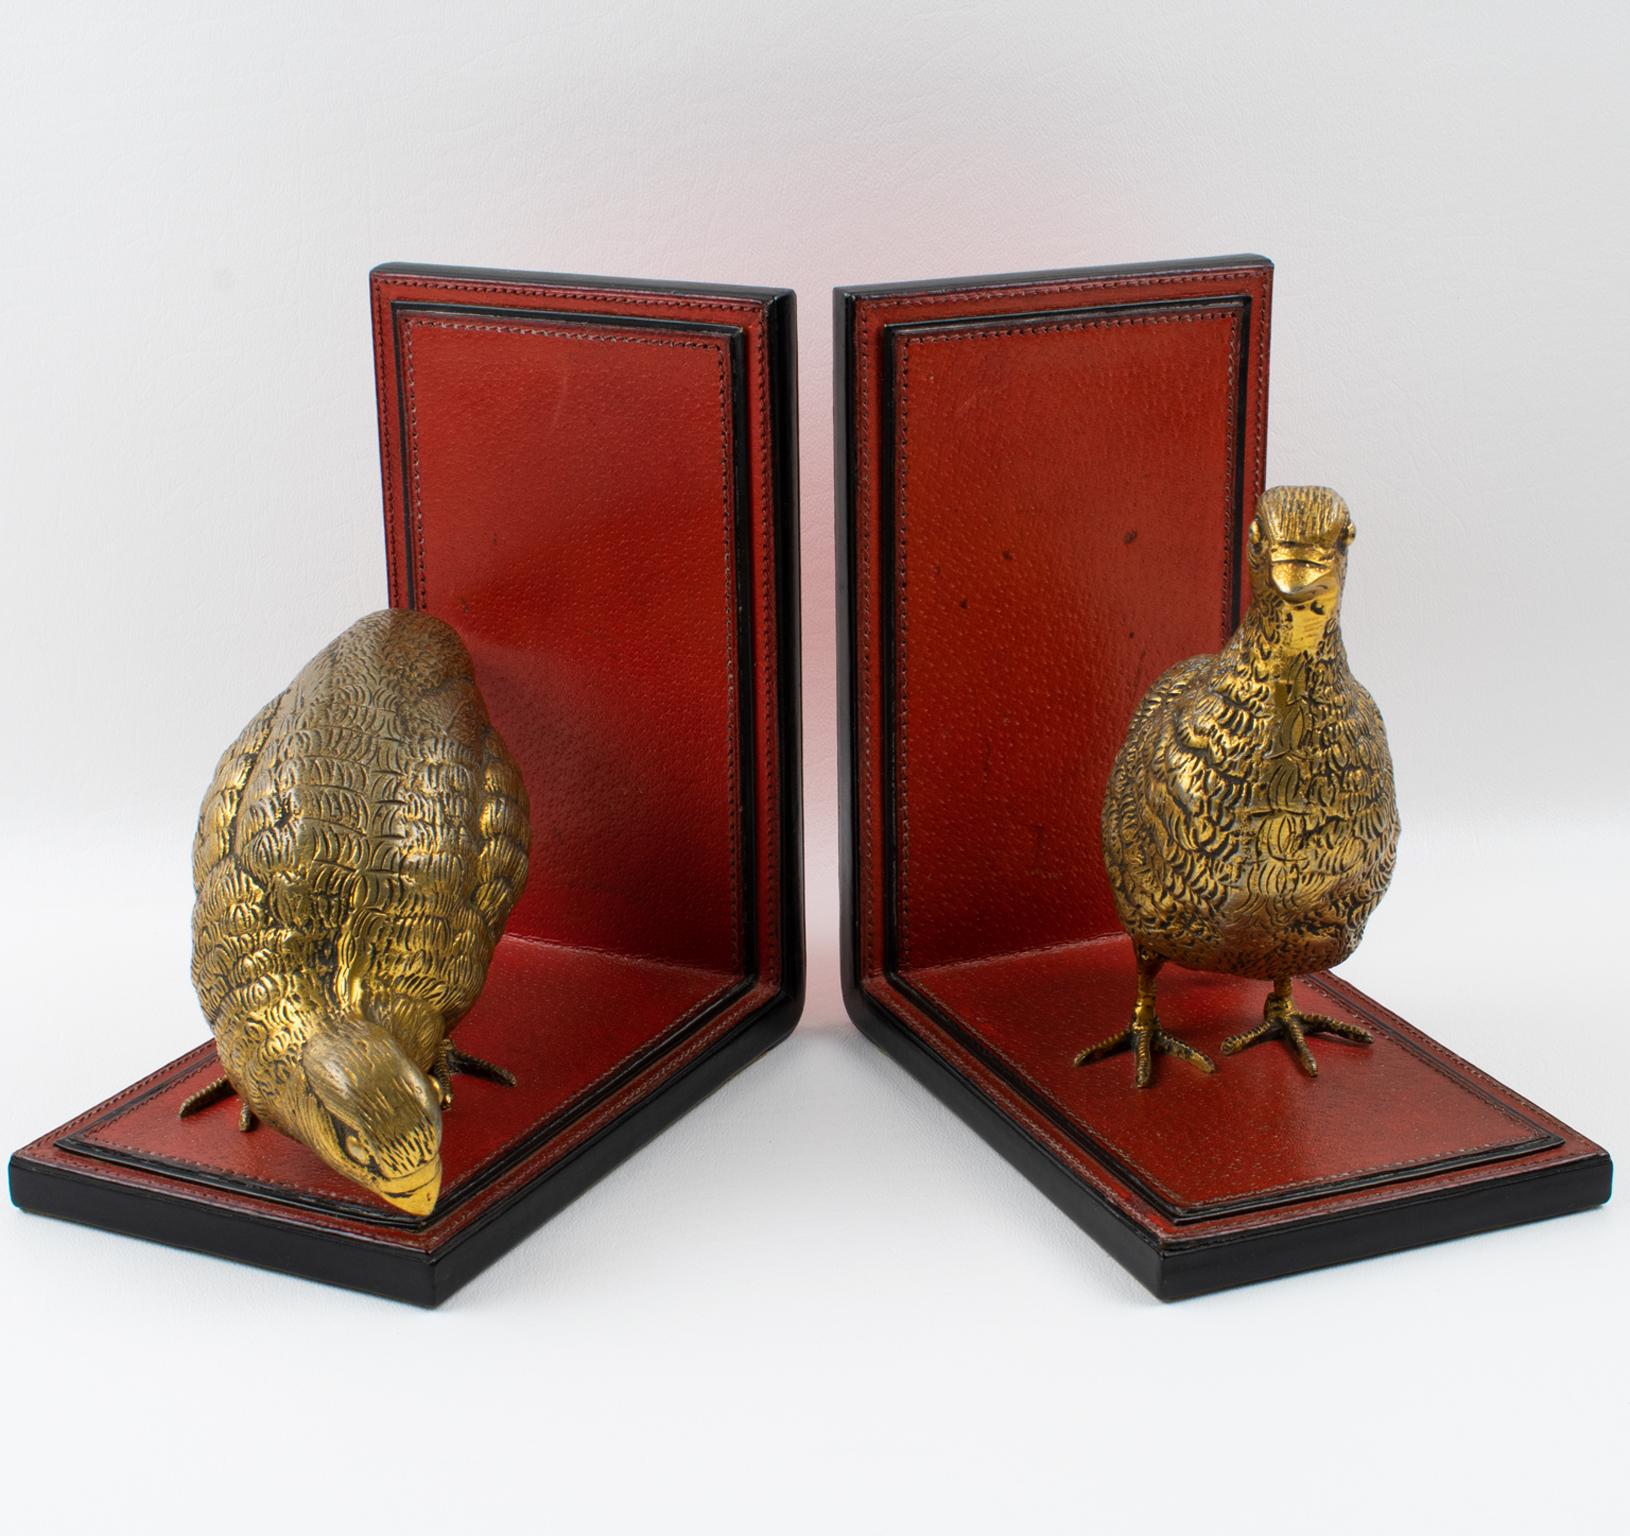 Gucci, Italy, designed this superb pair of handcrafted leather and metal bookends in the 1970s. This rare large-scale set features two gilded metal partridges resting on a hand-stitched leather 